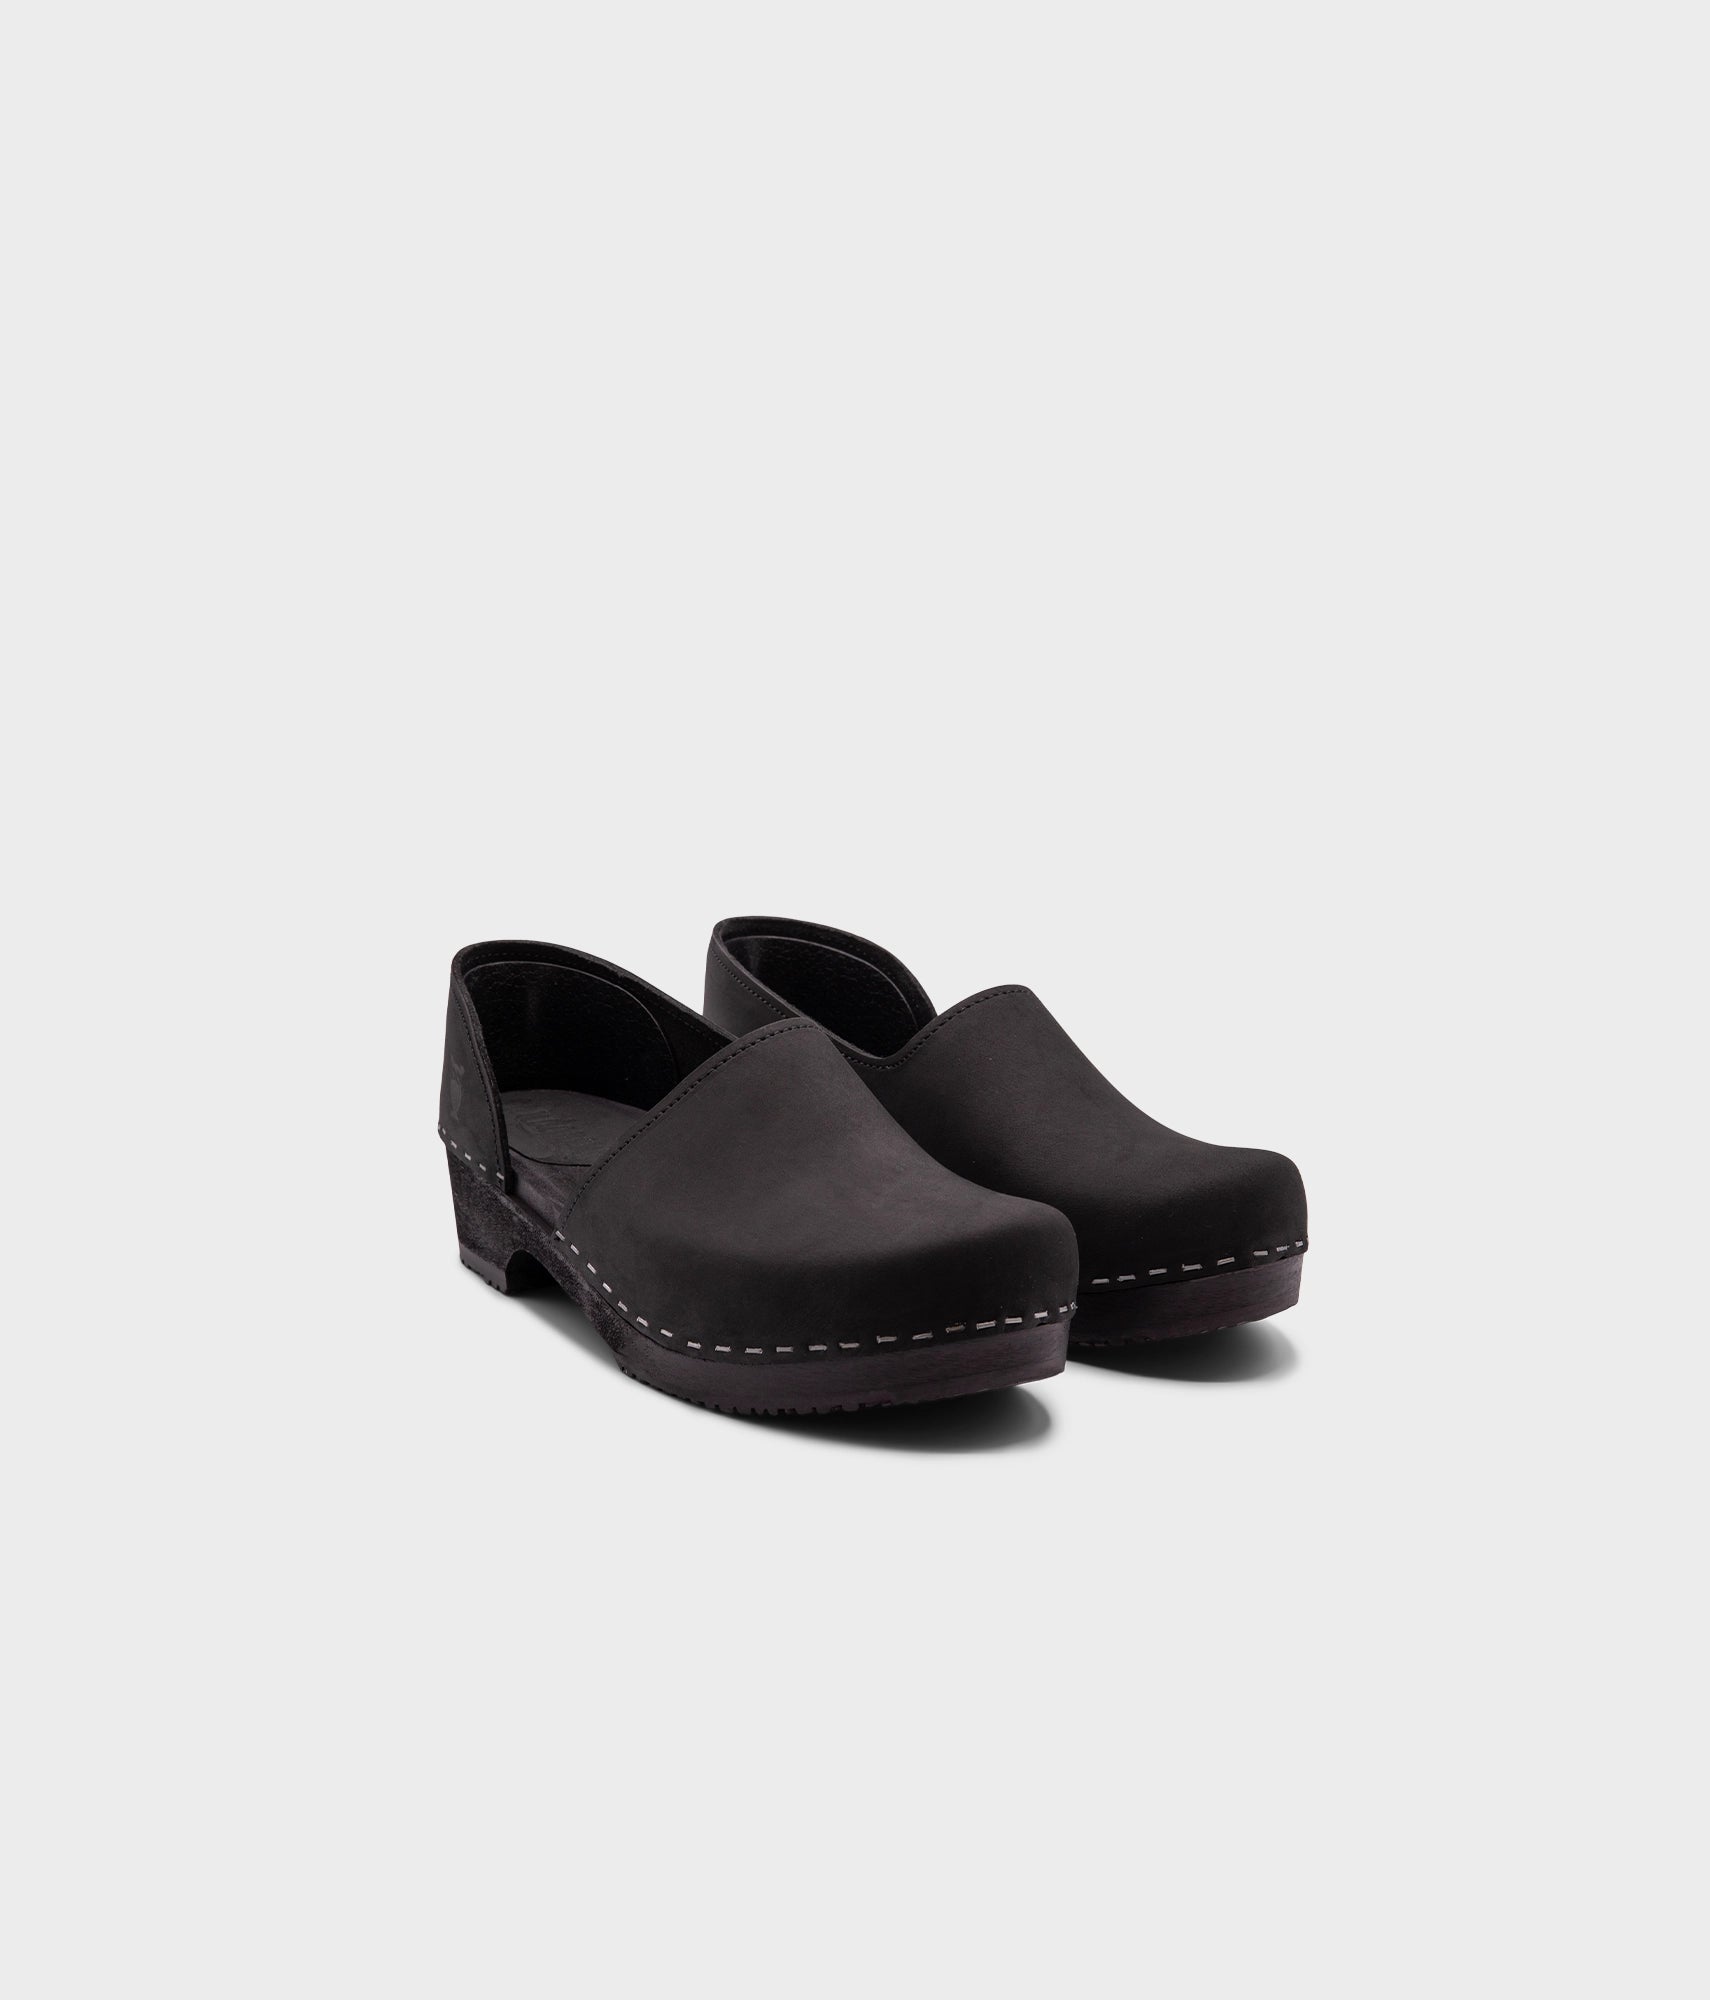 low heeled closed-back clogs in black nubuck leather stapled on a black wooden base